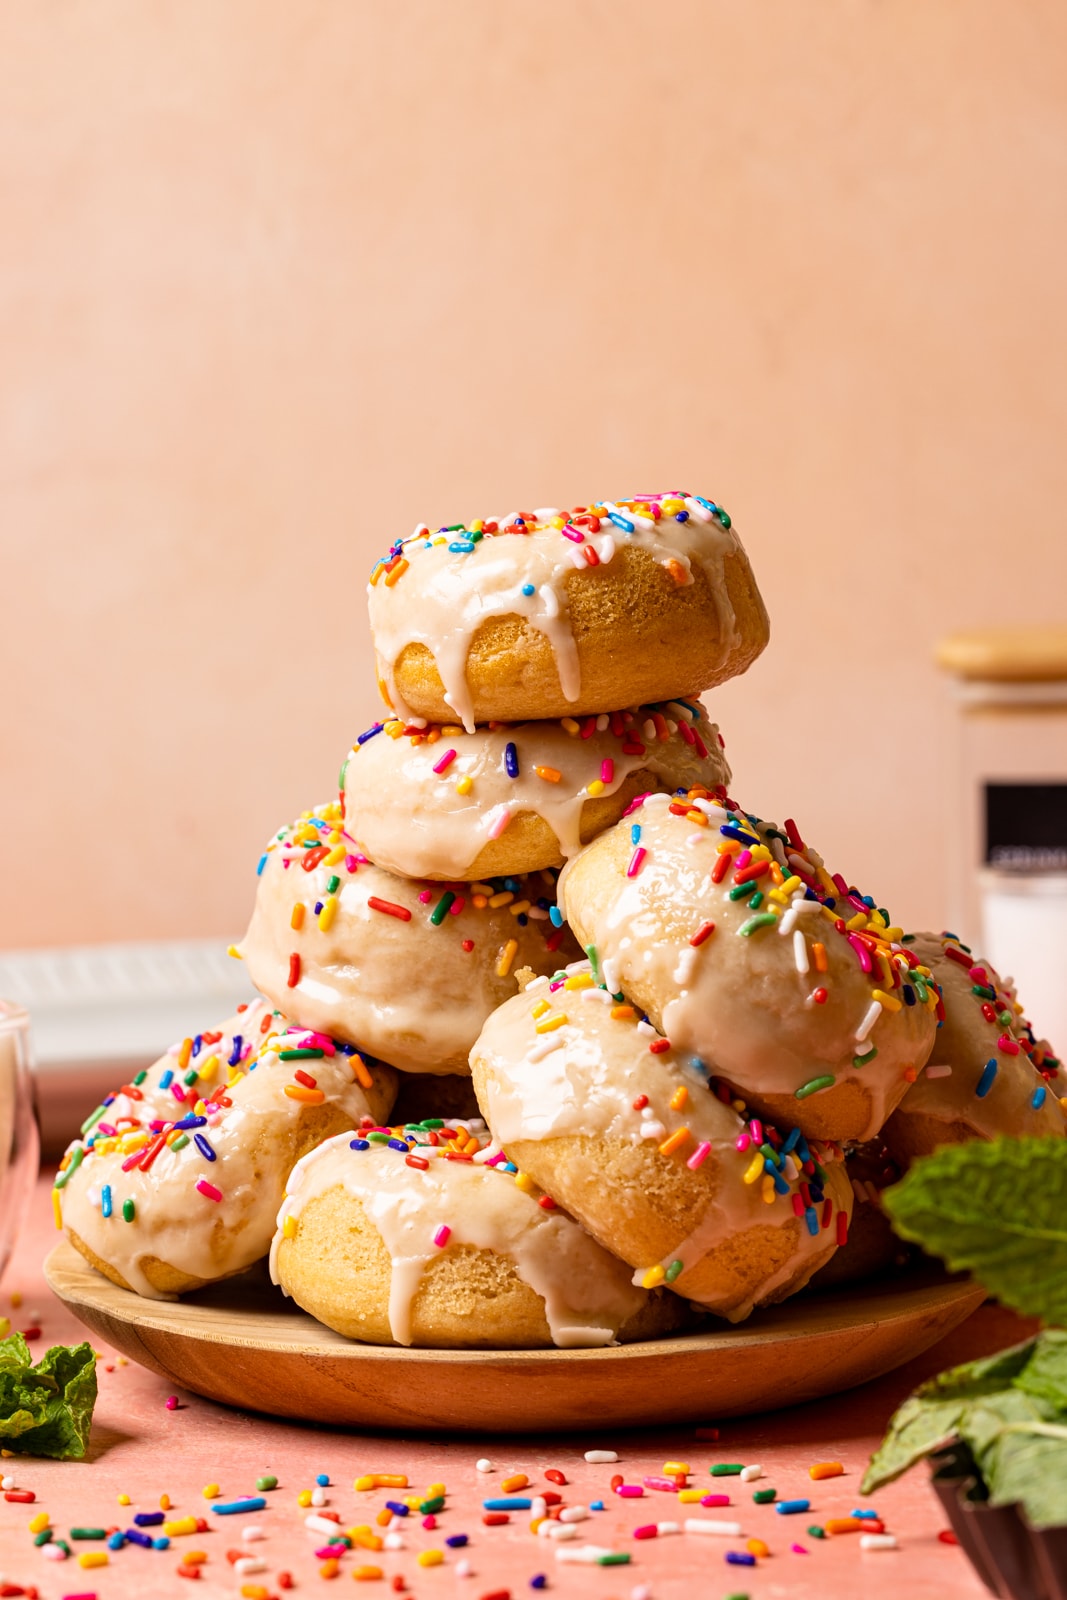 Stack of donuts on a plate on a pink table with sprinkles and garnish of herbs.